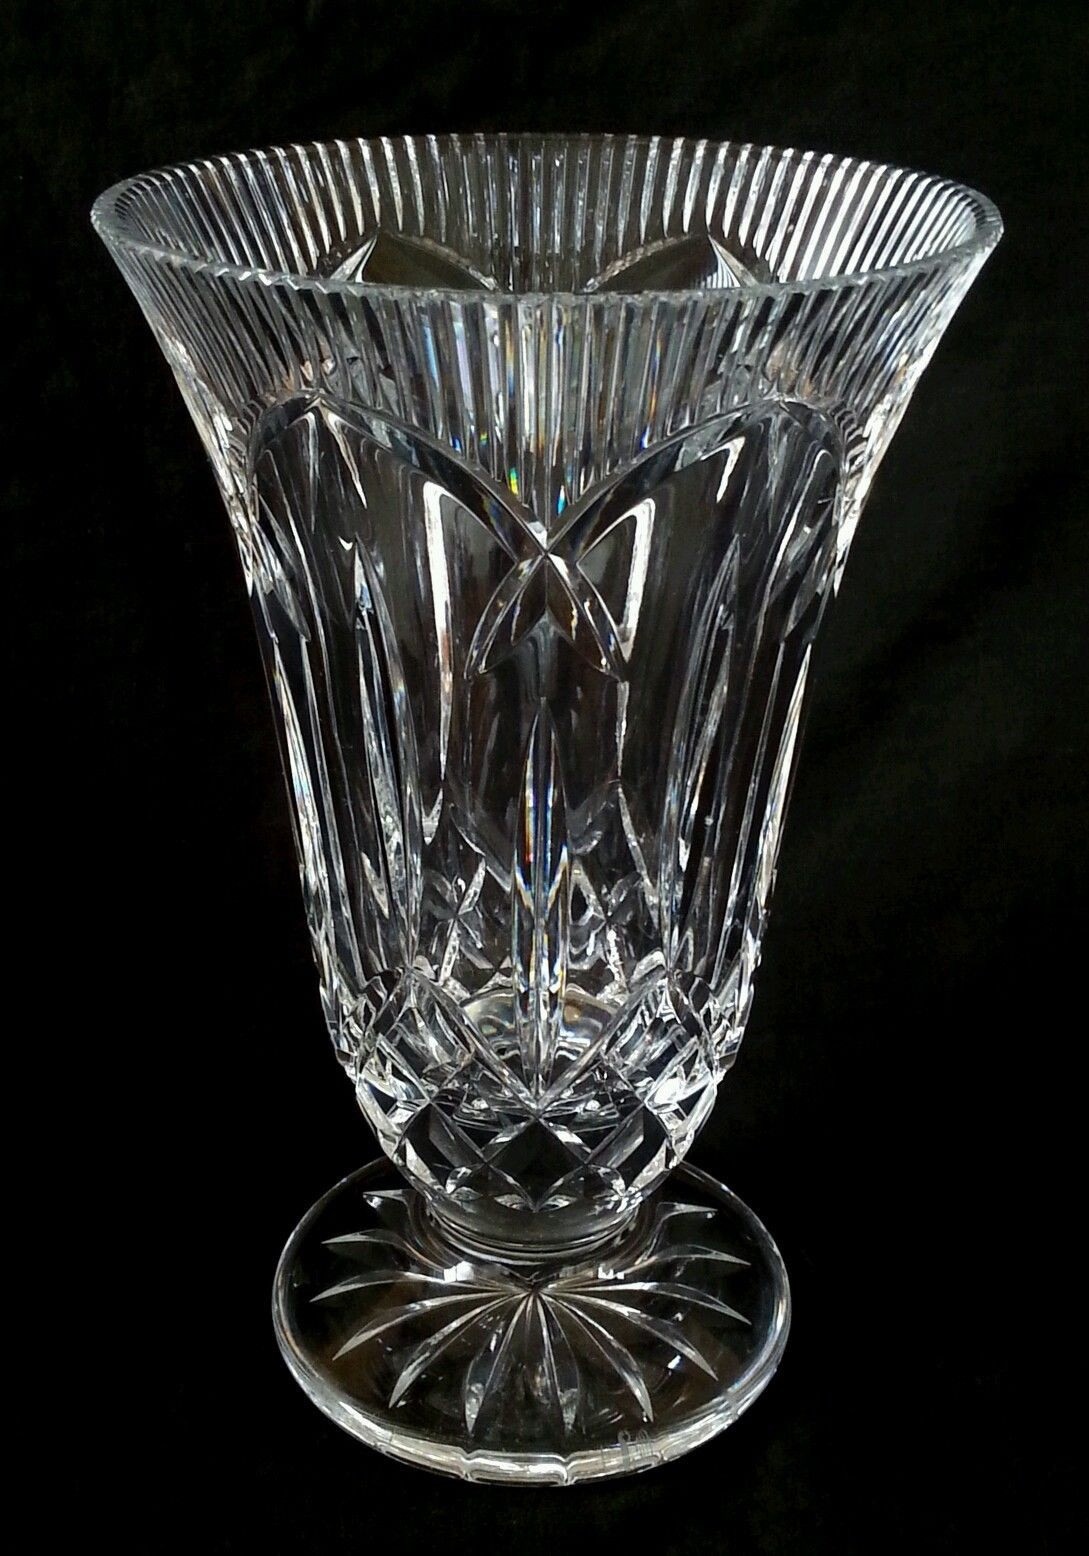 24 Perfect Waterford Lismore 8 Flared Vase 2024 free download waterford lismore 8 flared vase of large vintage waterford crystal vase 10 inches ireland 169 99 regarding 7 of 12 large vintage waterford crystal vase 10 inches ireland 8 of 12 large vintag